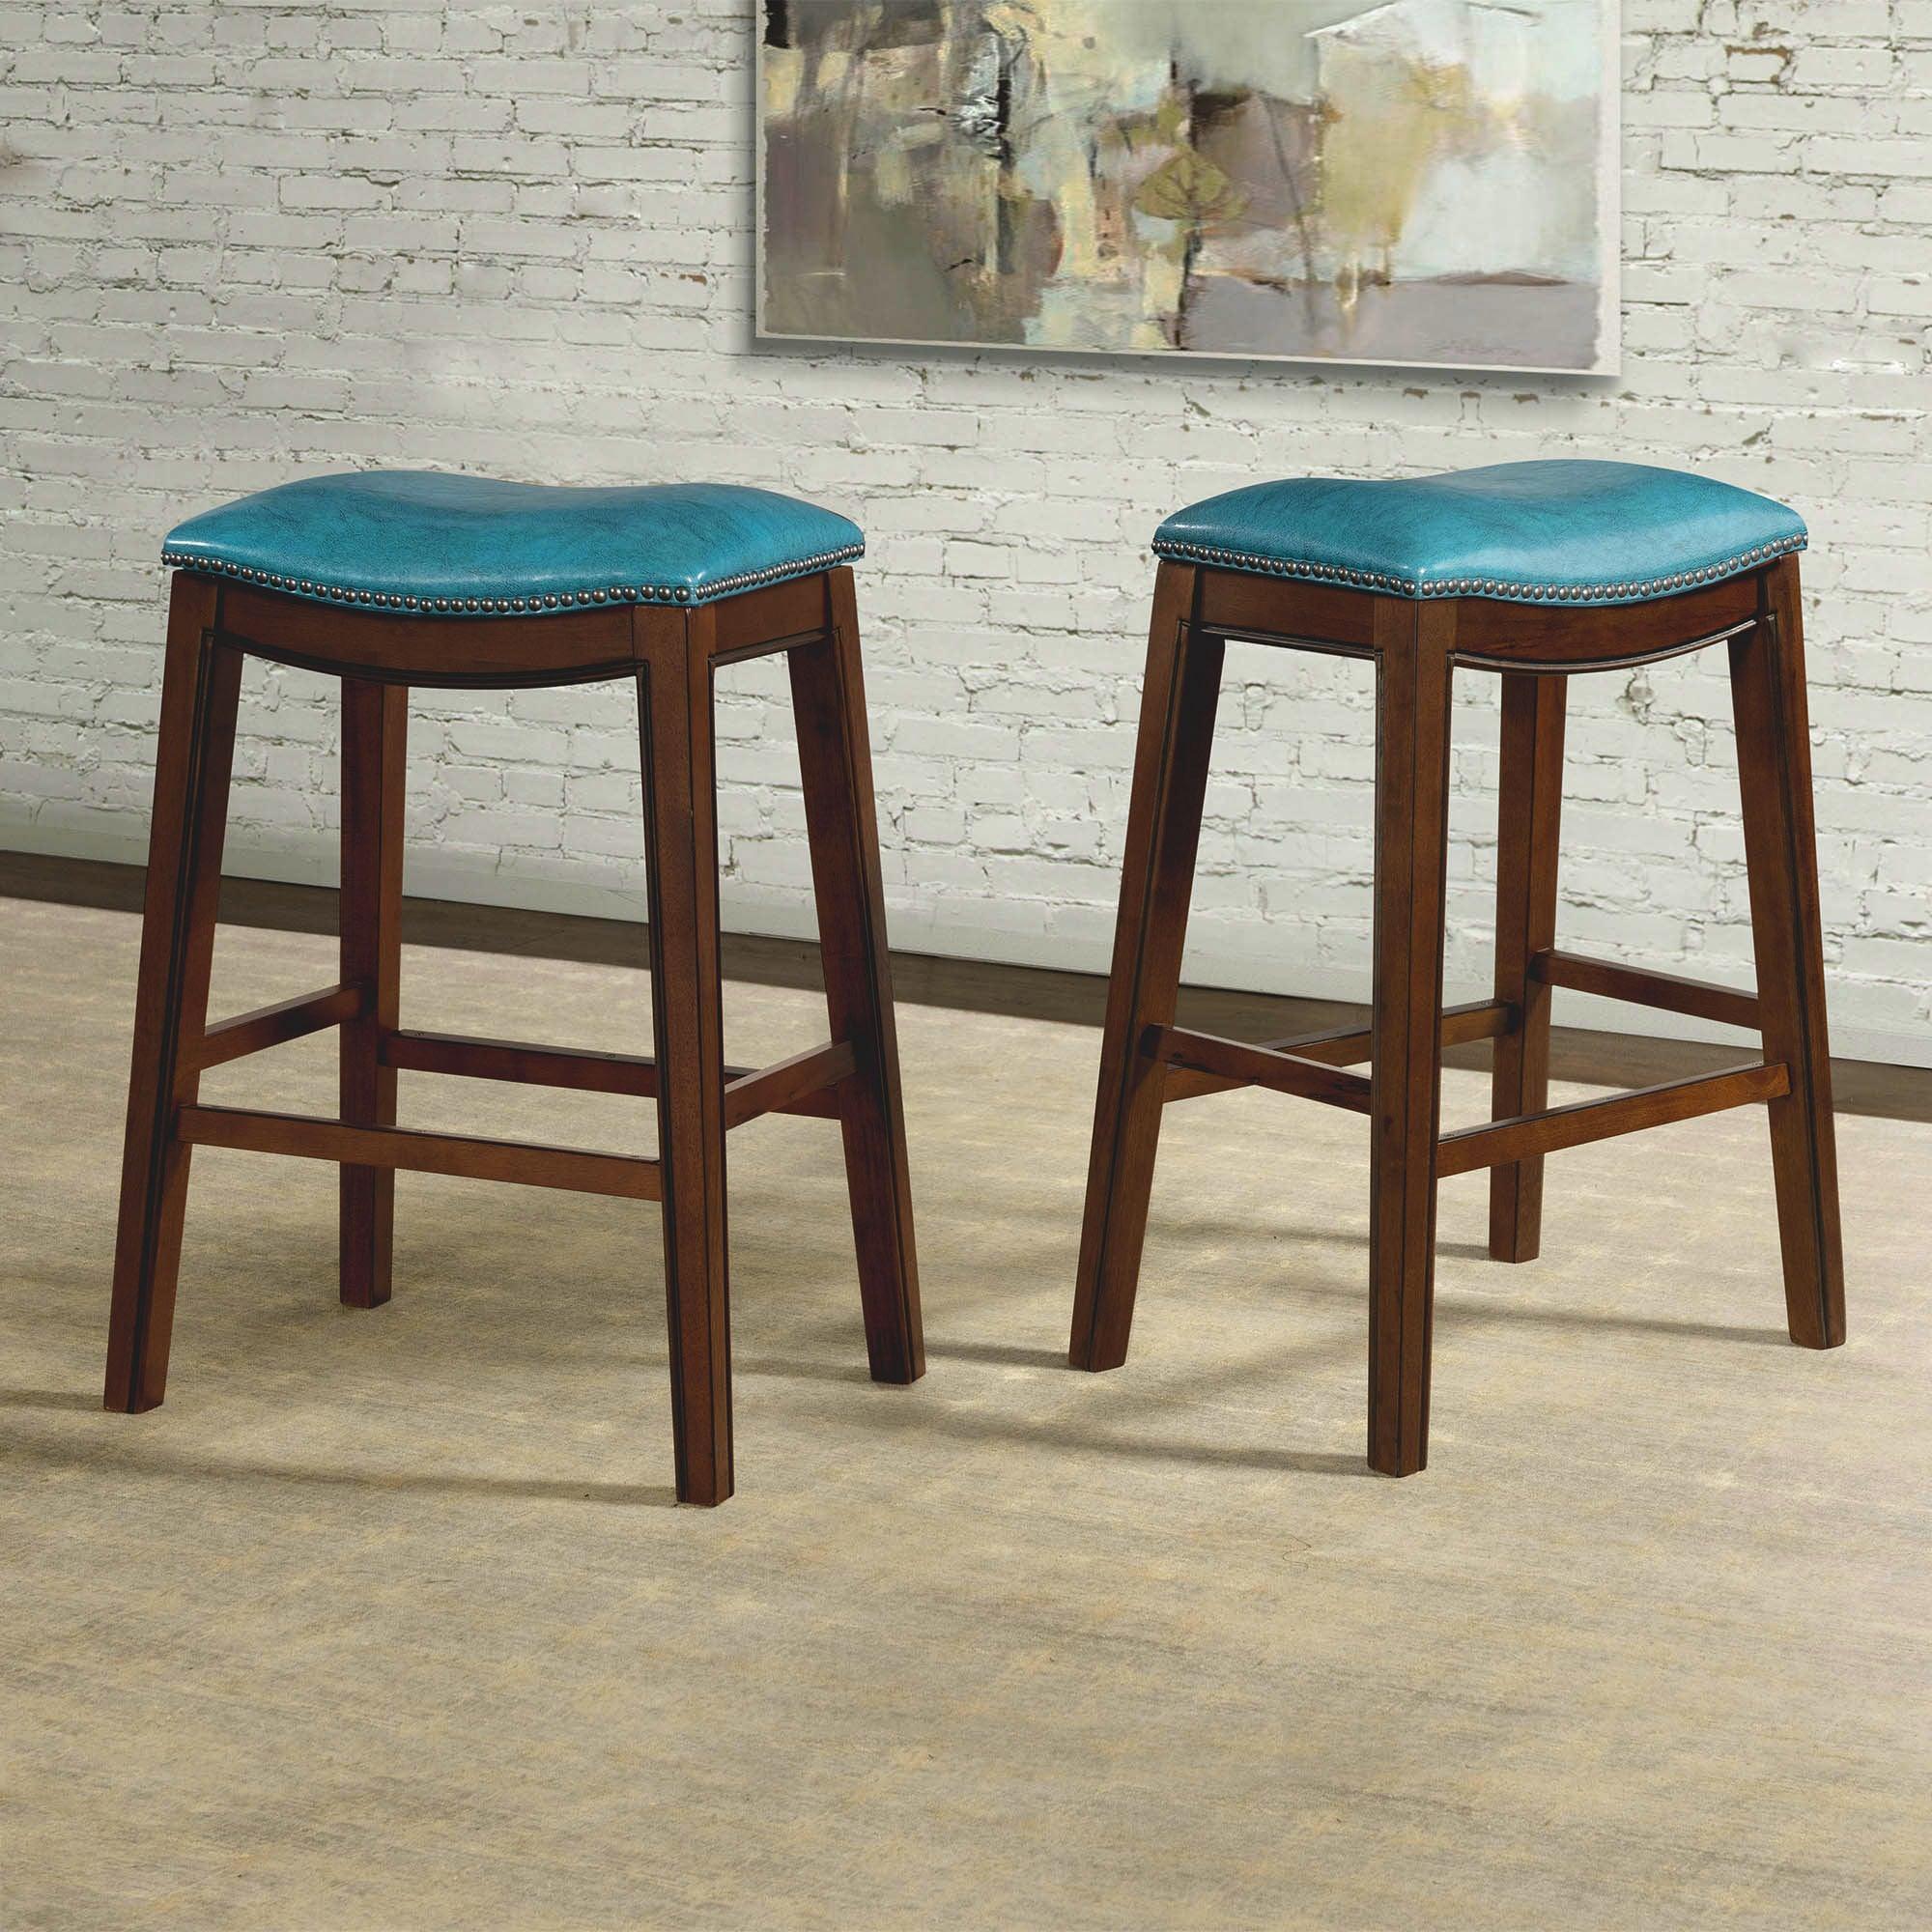 Elements Barstools - Bowen 30" Backless Bar Stool in Blue